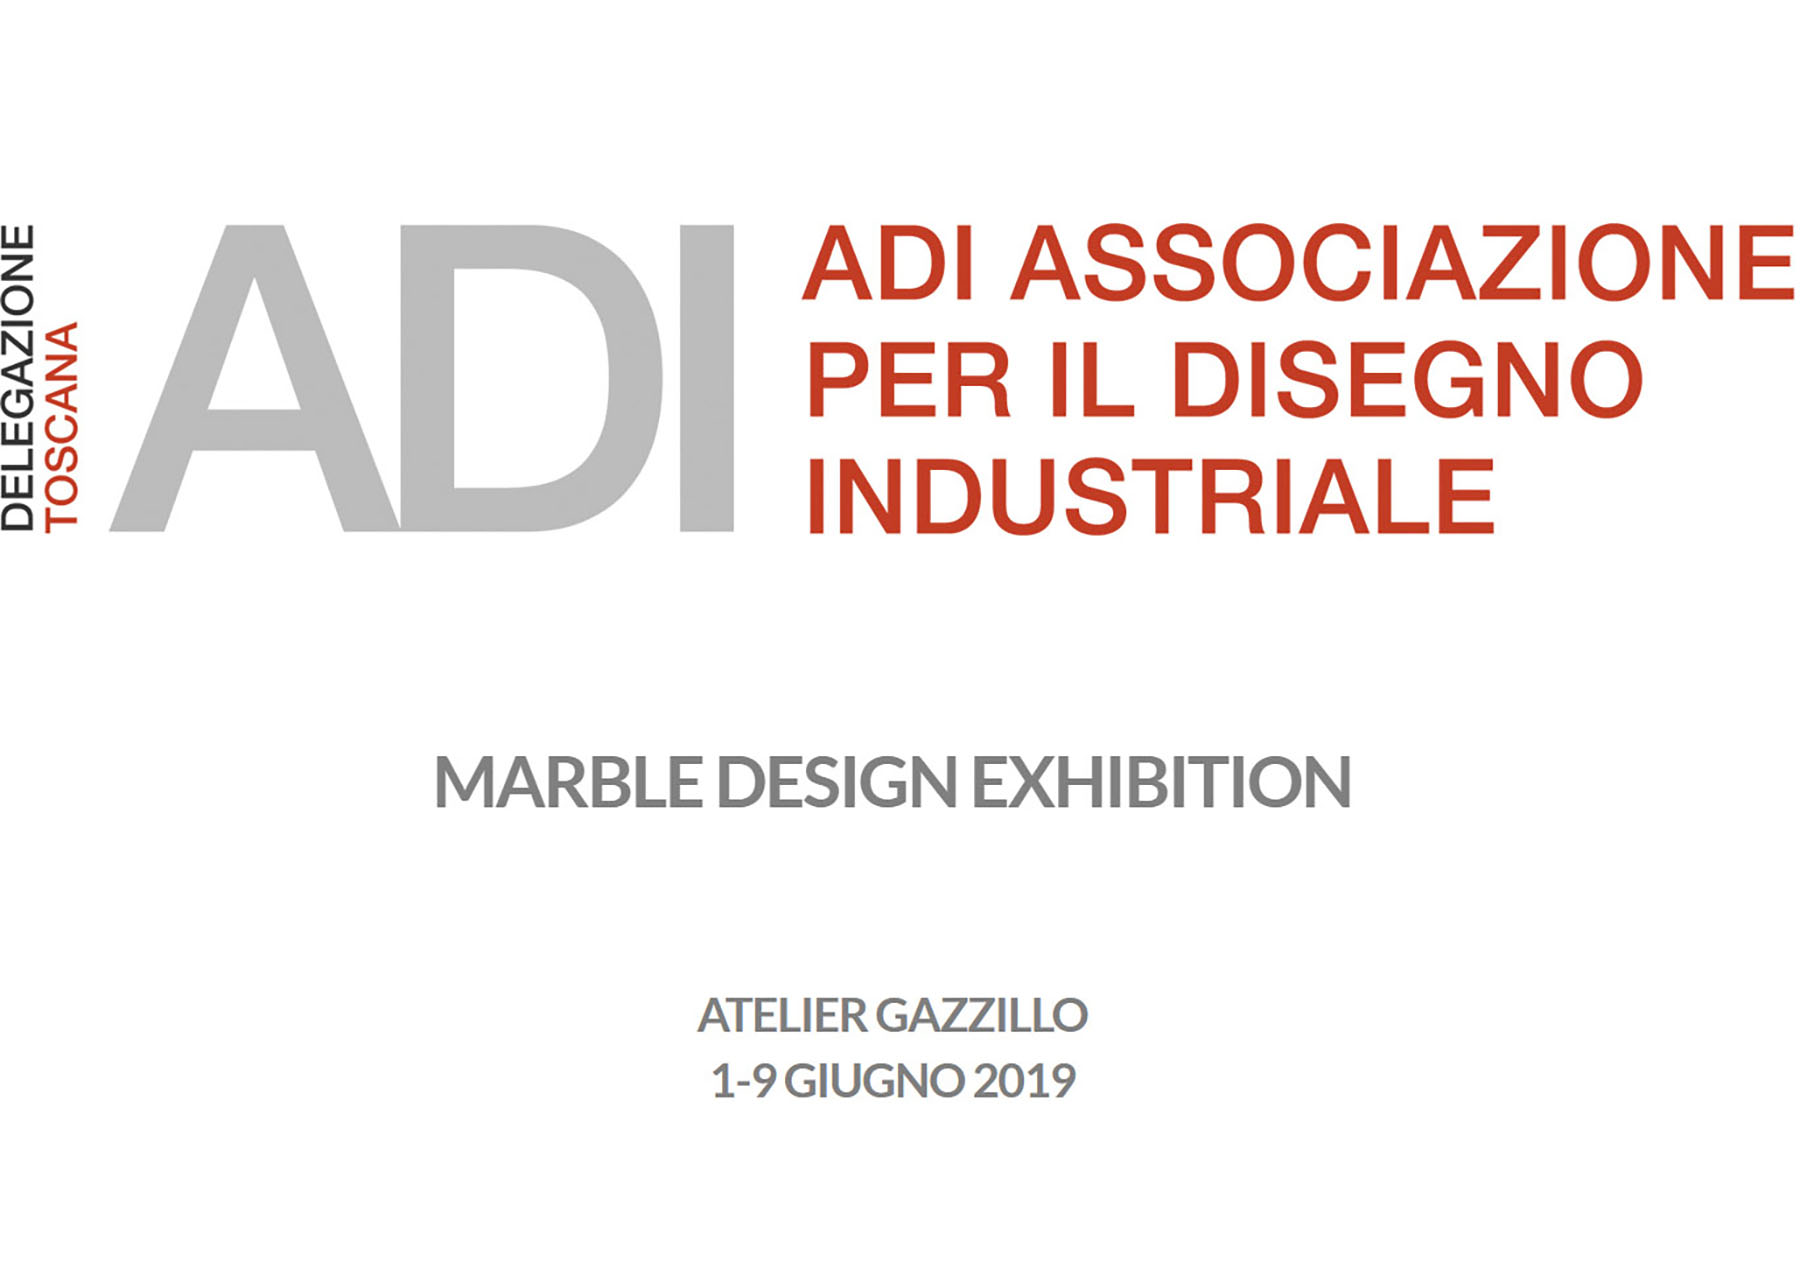 Marble Design Exhibition: the dialogue between marble and design